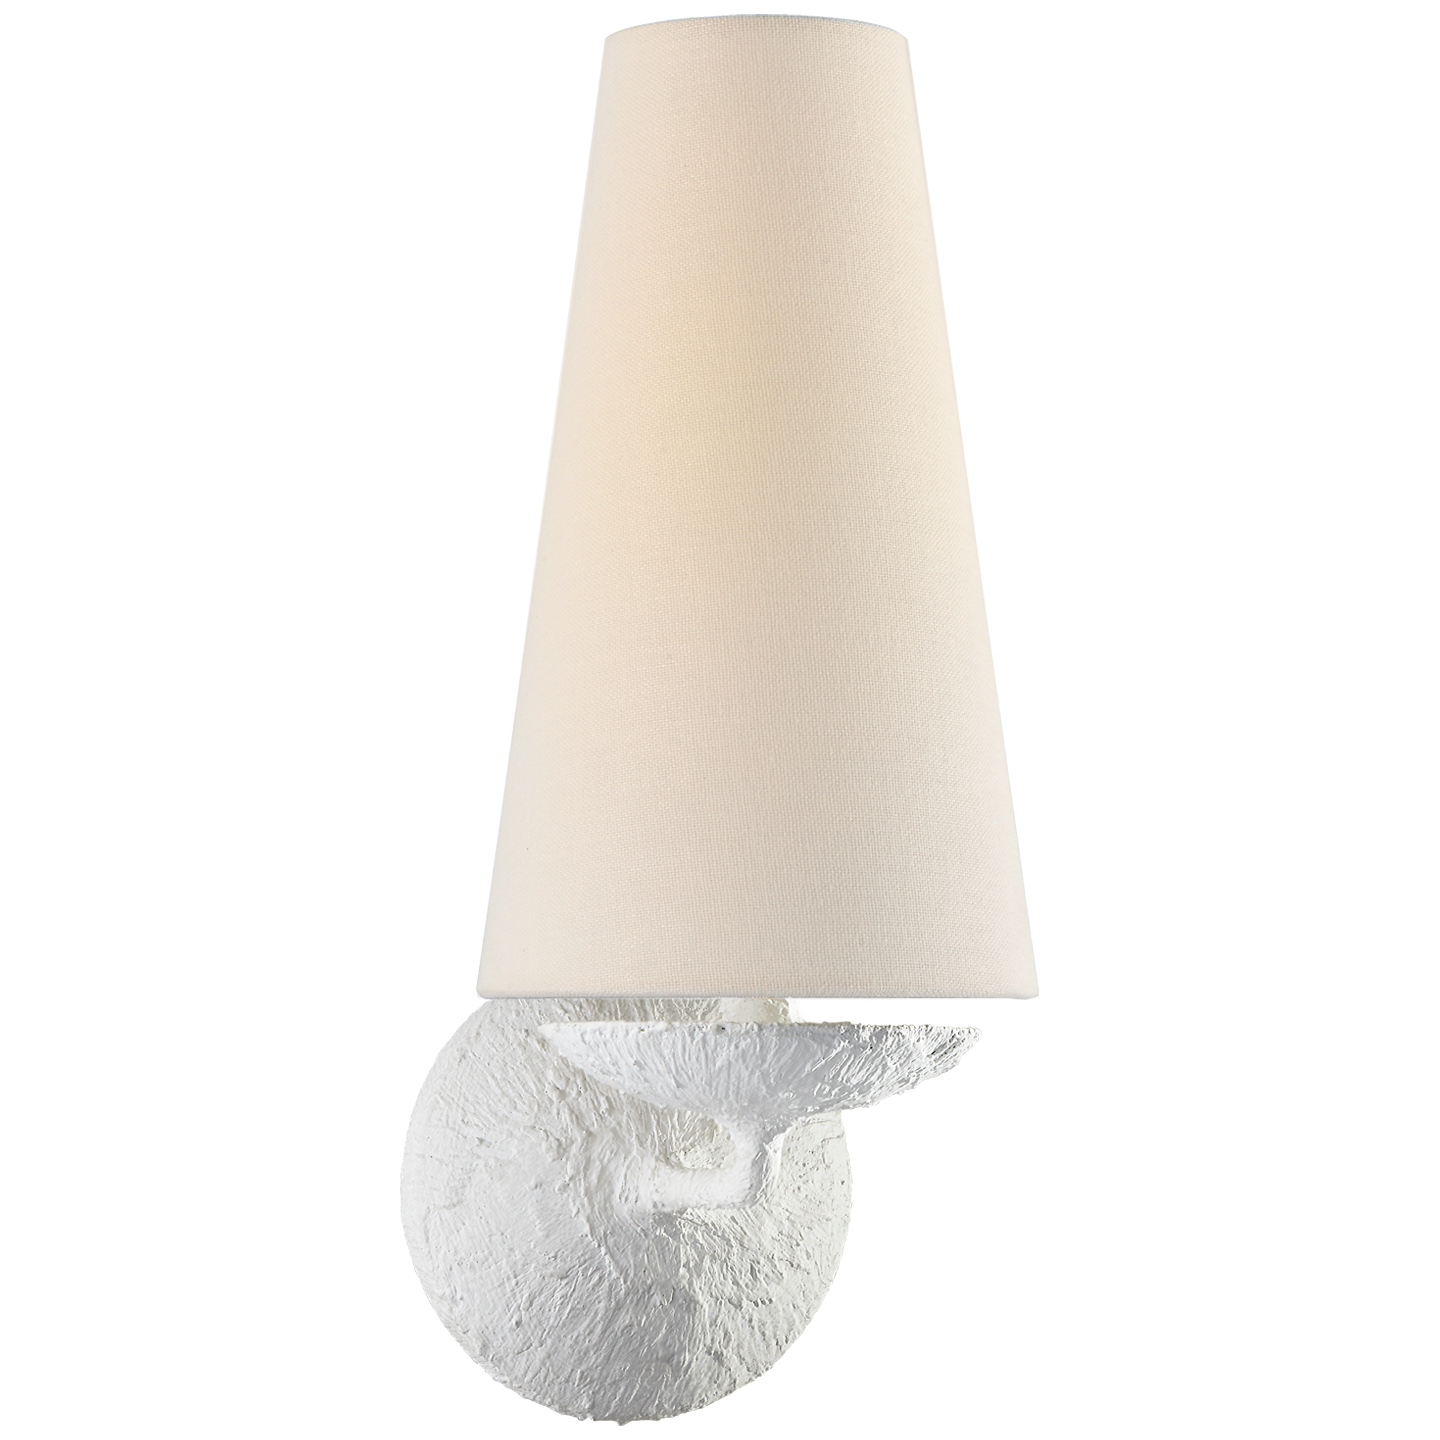 The linen shade of this Fontaine Single Sconce sheds a soft, warm glow. This looks gorgeous placed in a living room, hallway, or other area needing extra light.   Designer: AERIN